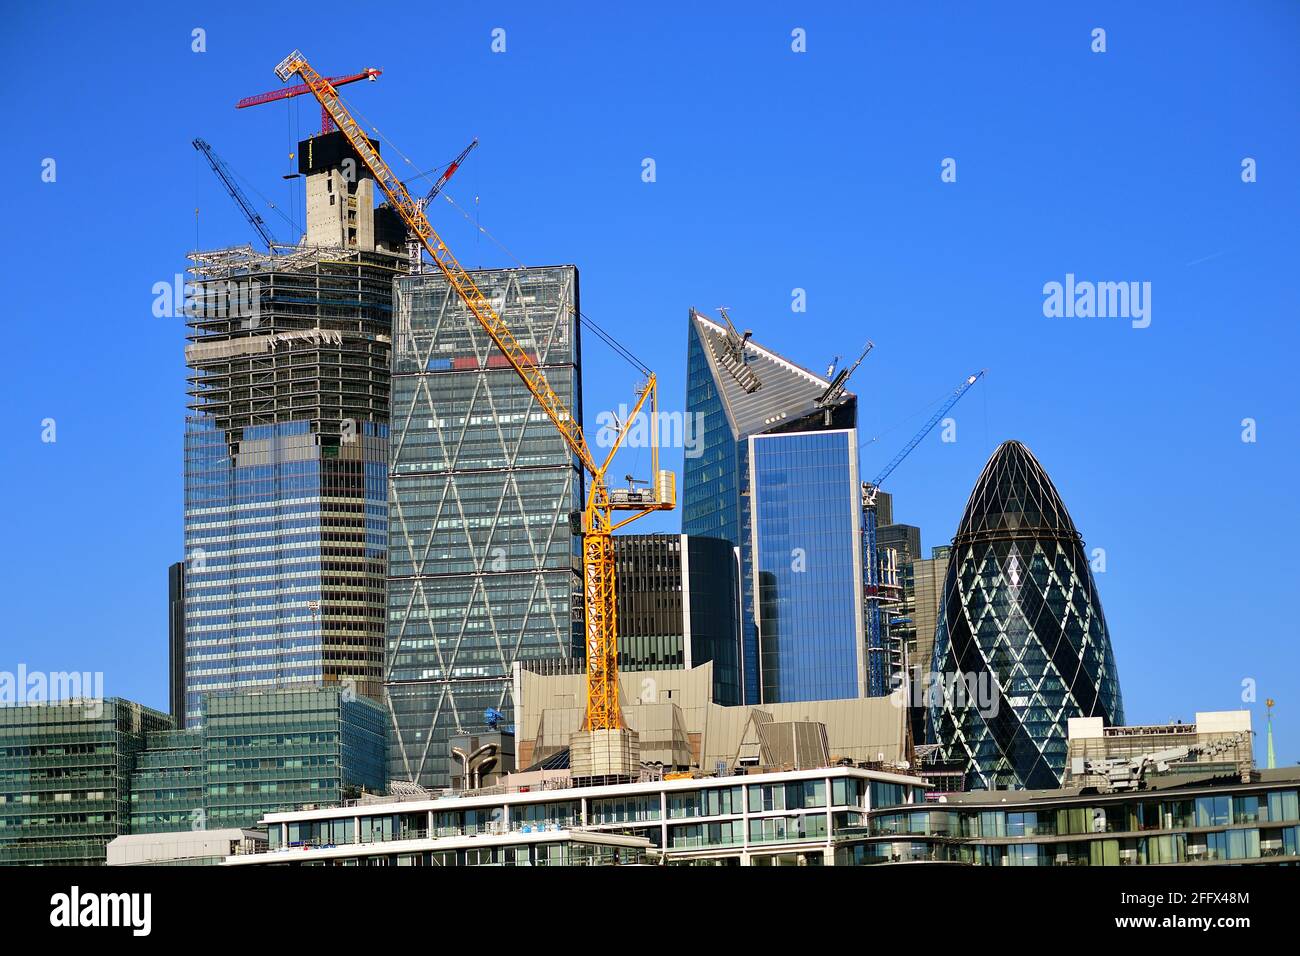 London, England, United Kingdom. The fast expanding skyline is rapidly apparent among the construction cranes in the City of London. Stock Photo